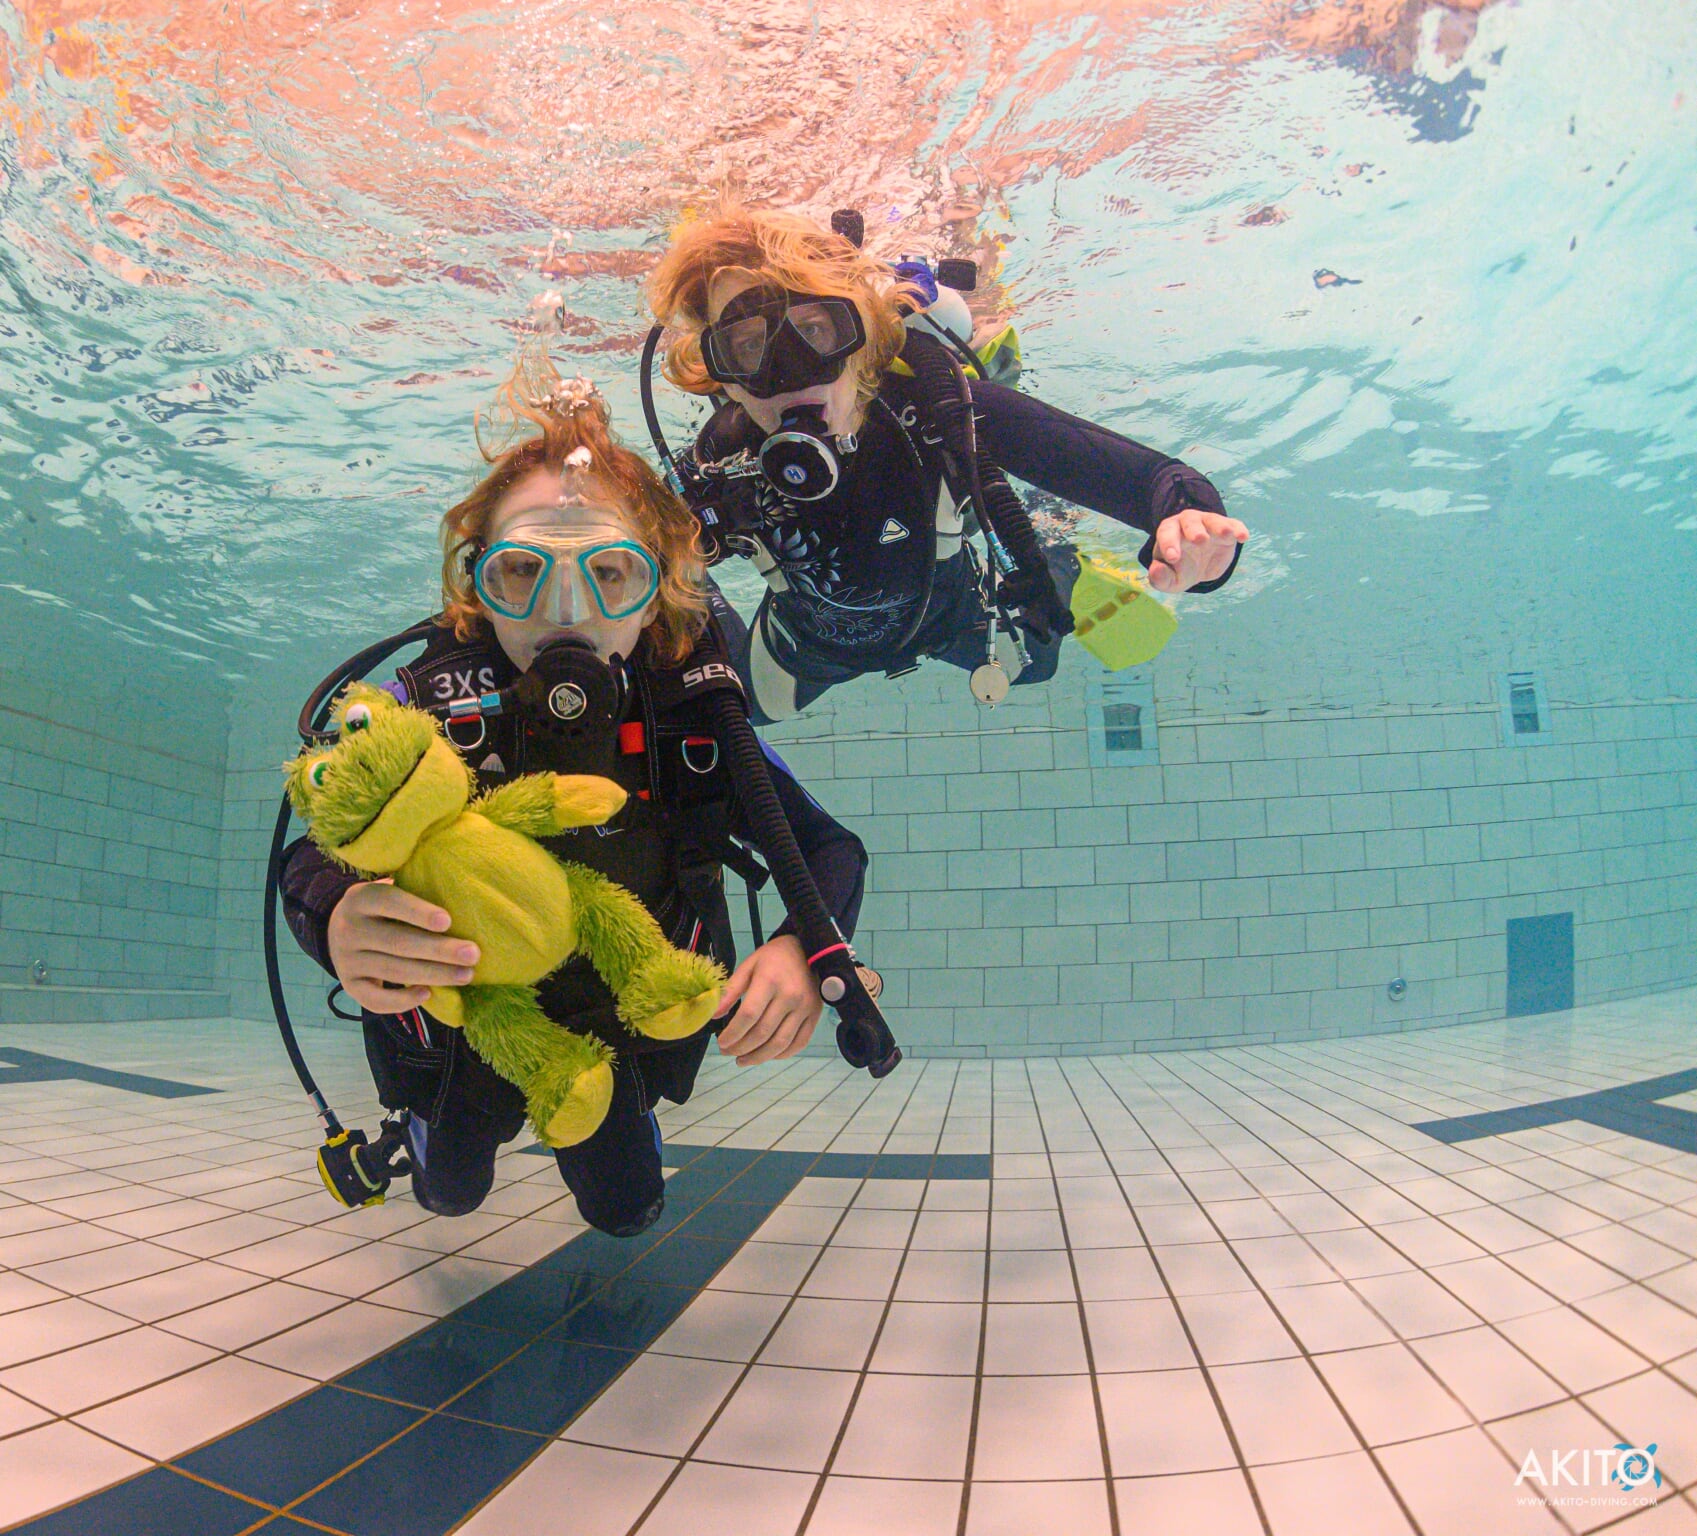 Is Scuba Diving for Kids?, We Solve All Your Questions